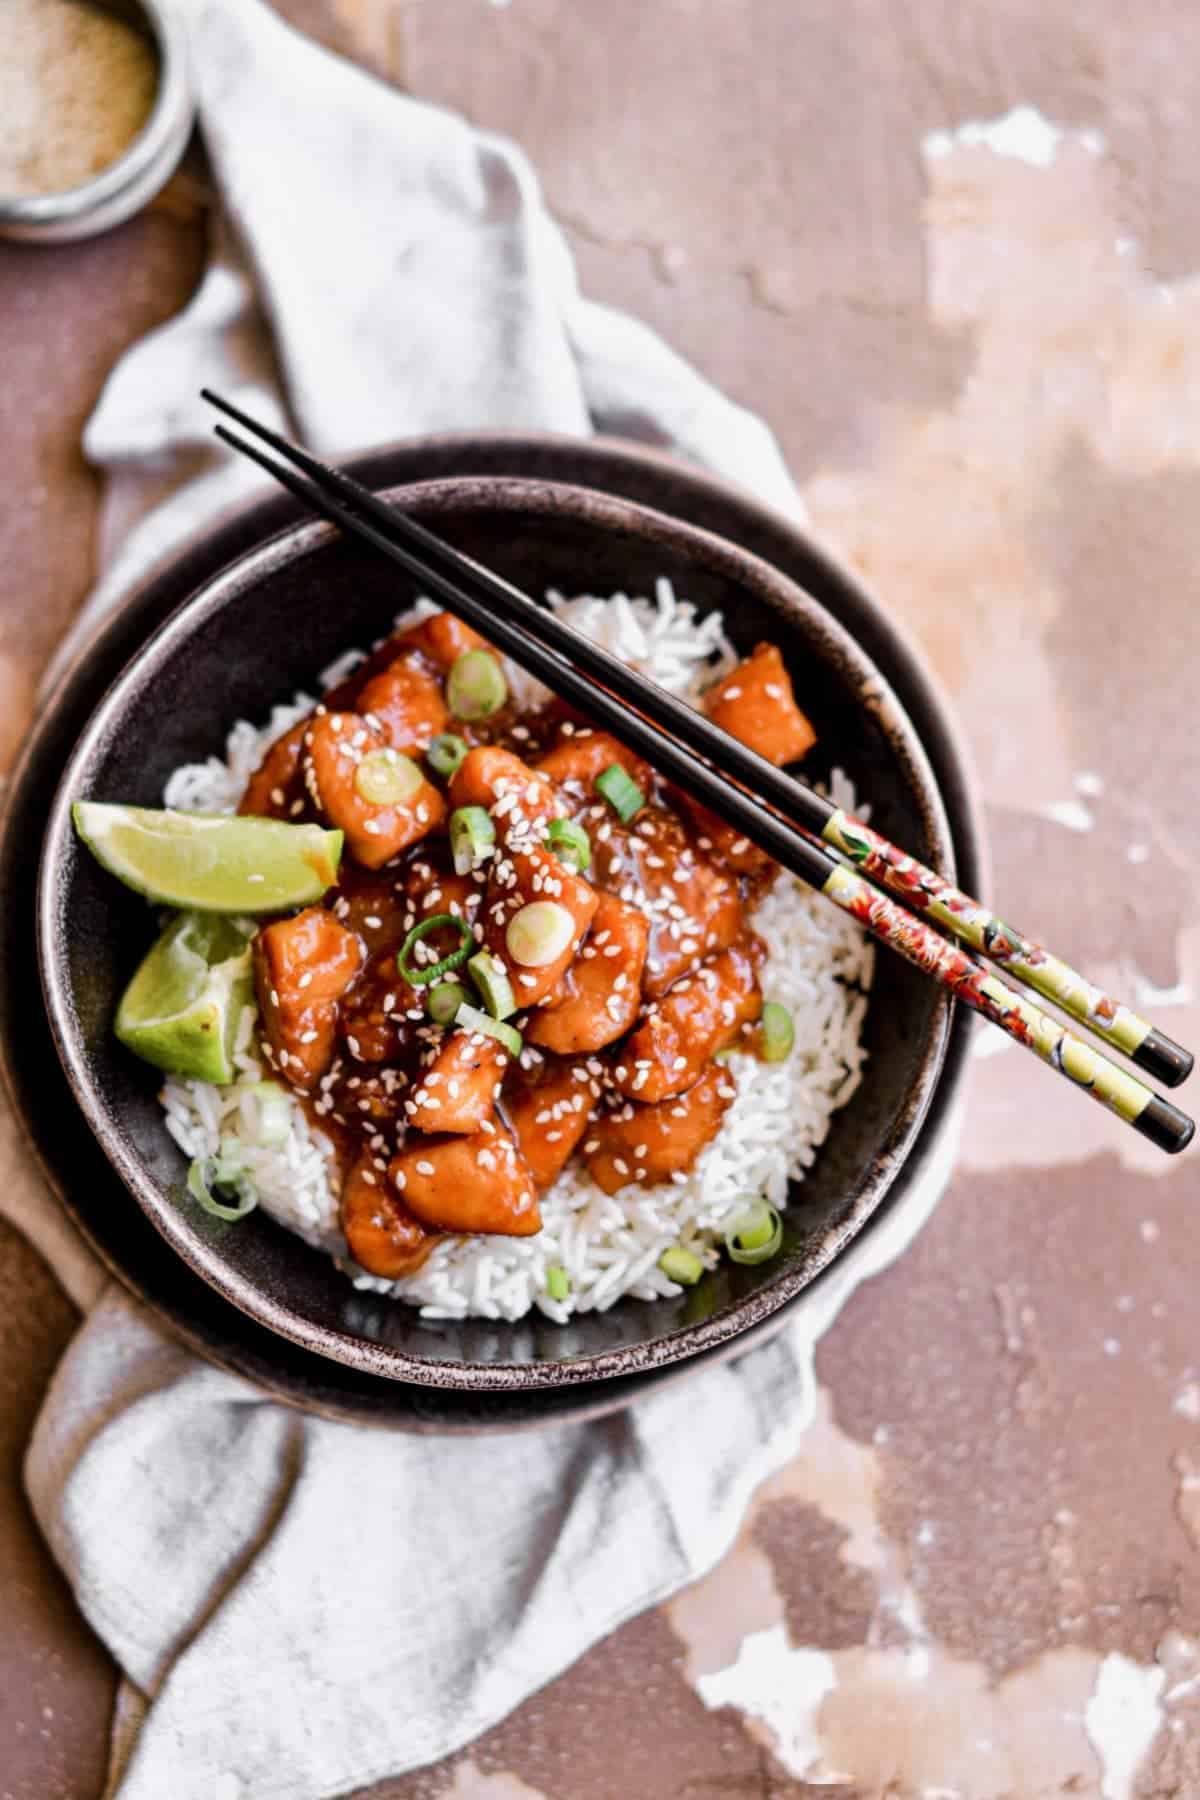 Orange chicken served in a bowl with rice